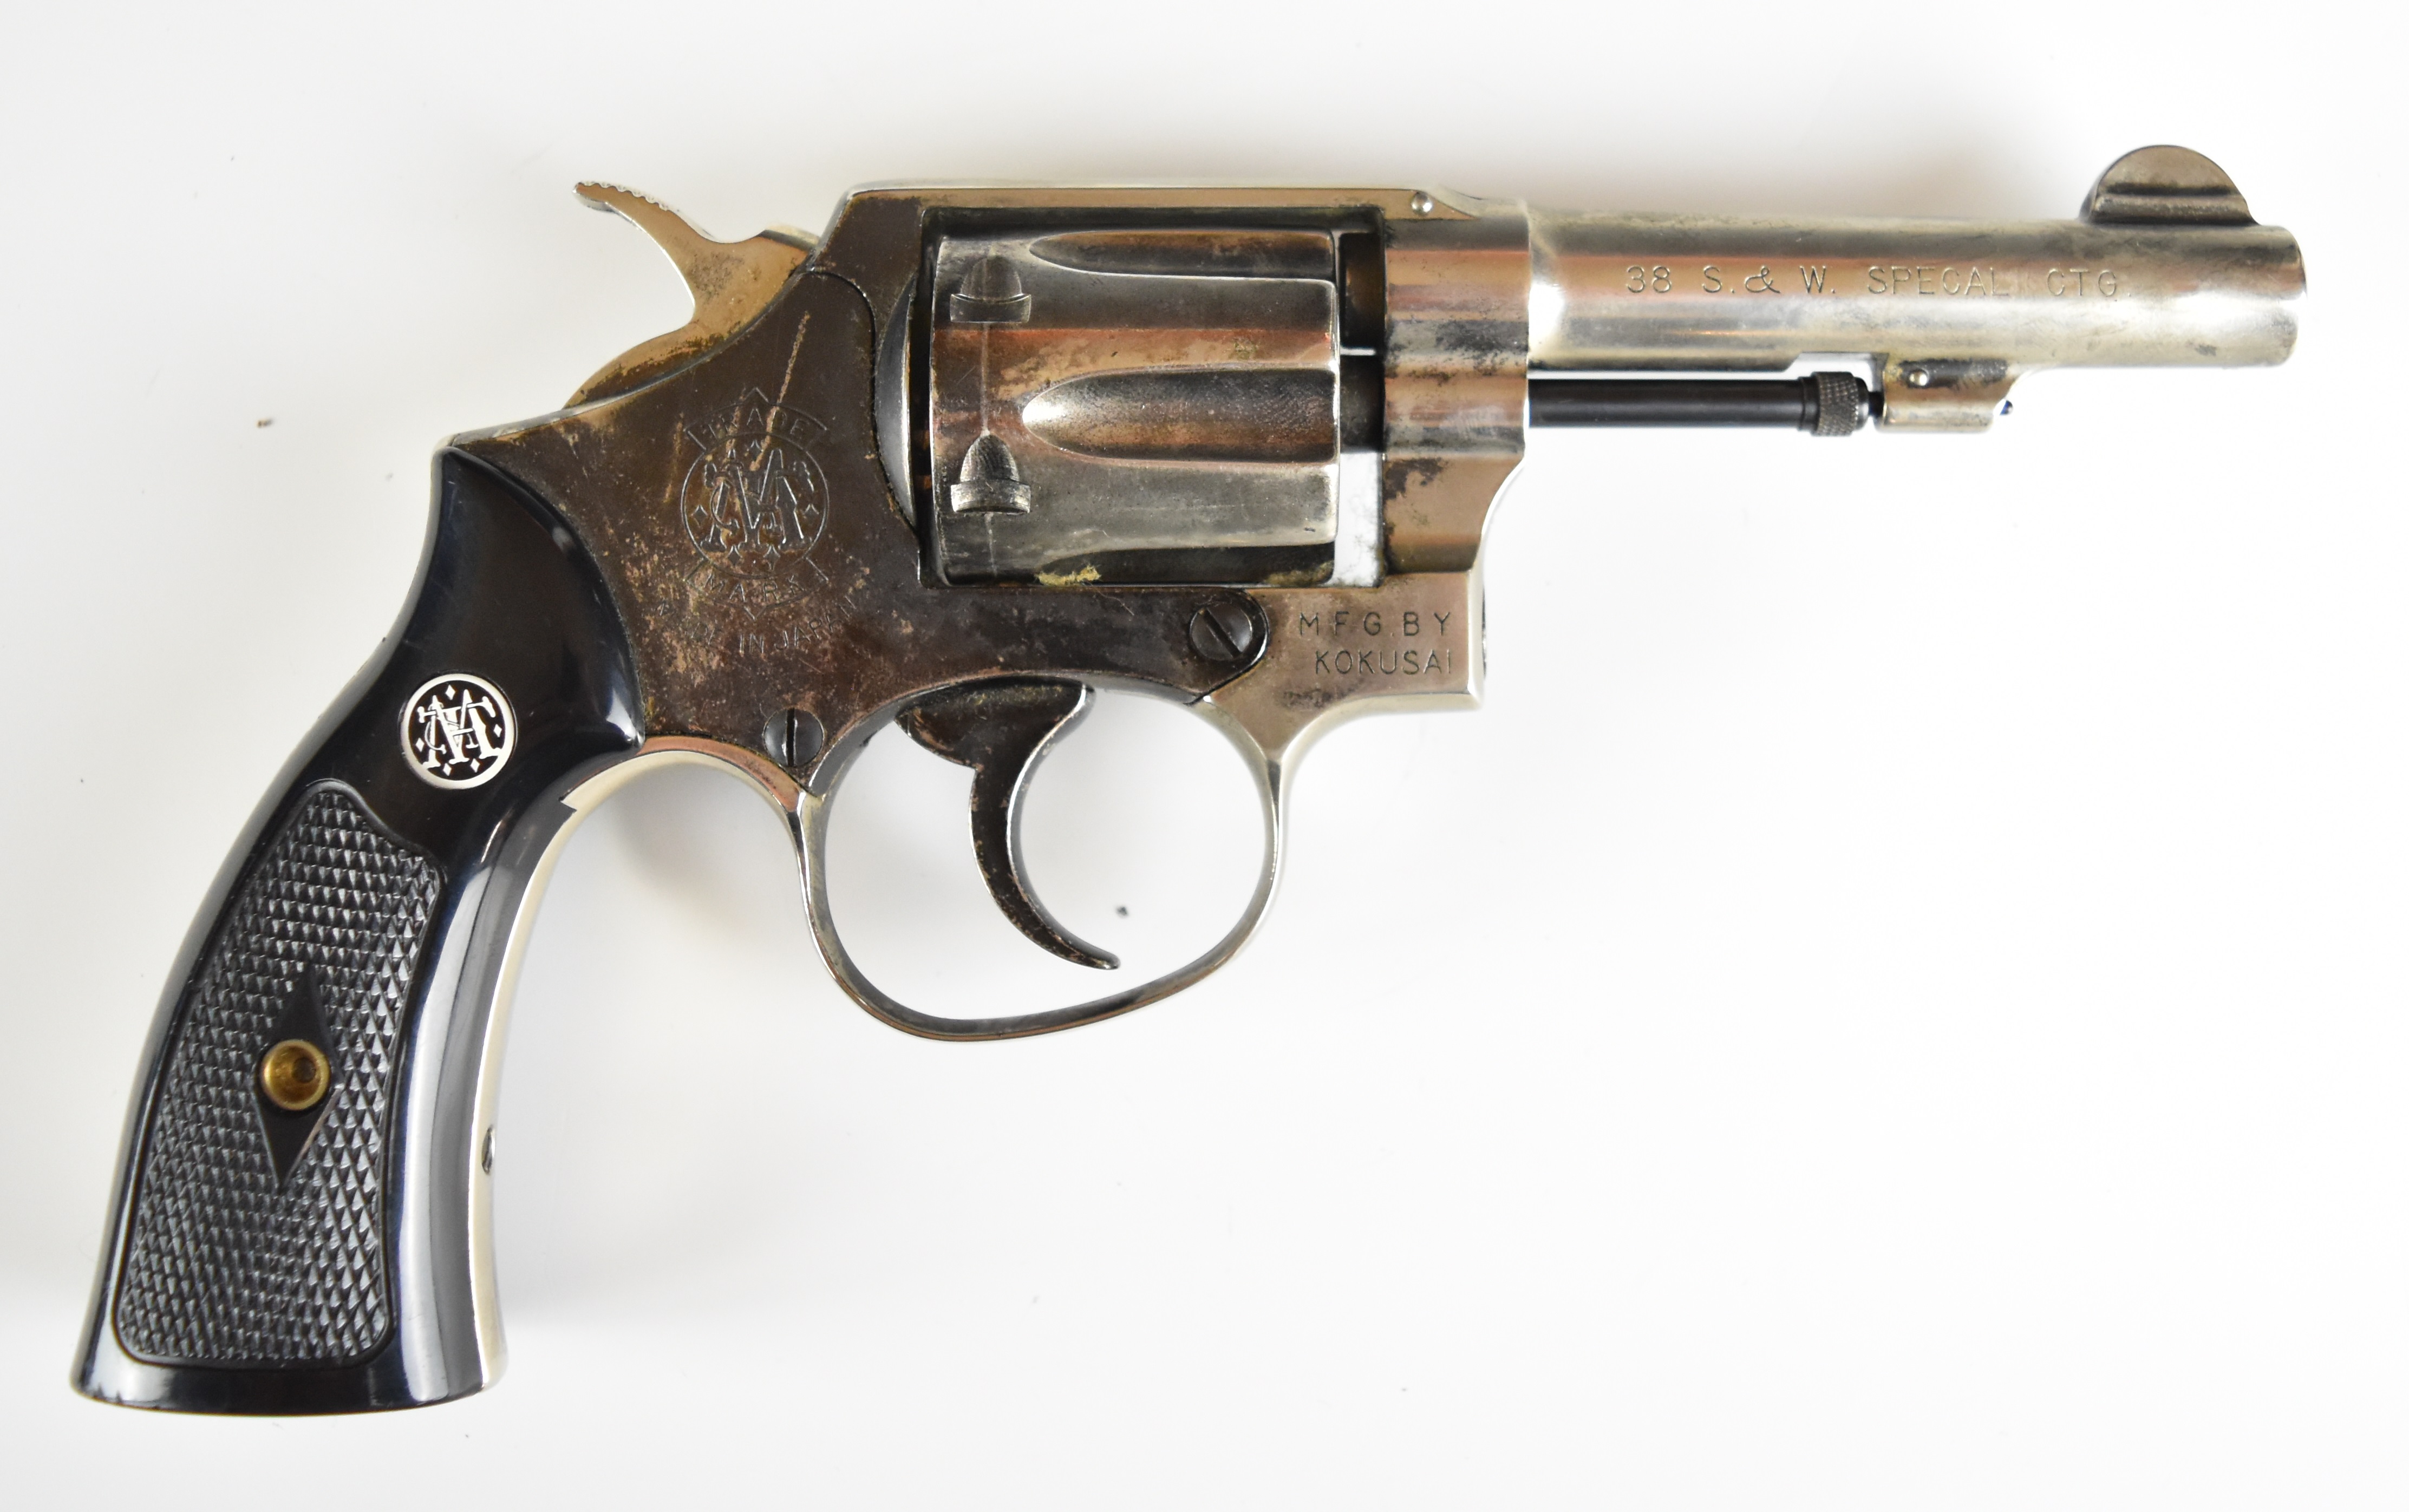 Kokusai Smith & Wesson .38 Special CTG style six shot double-action blank firing revolver with